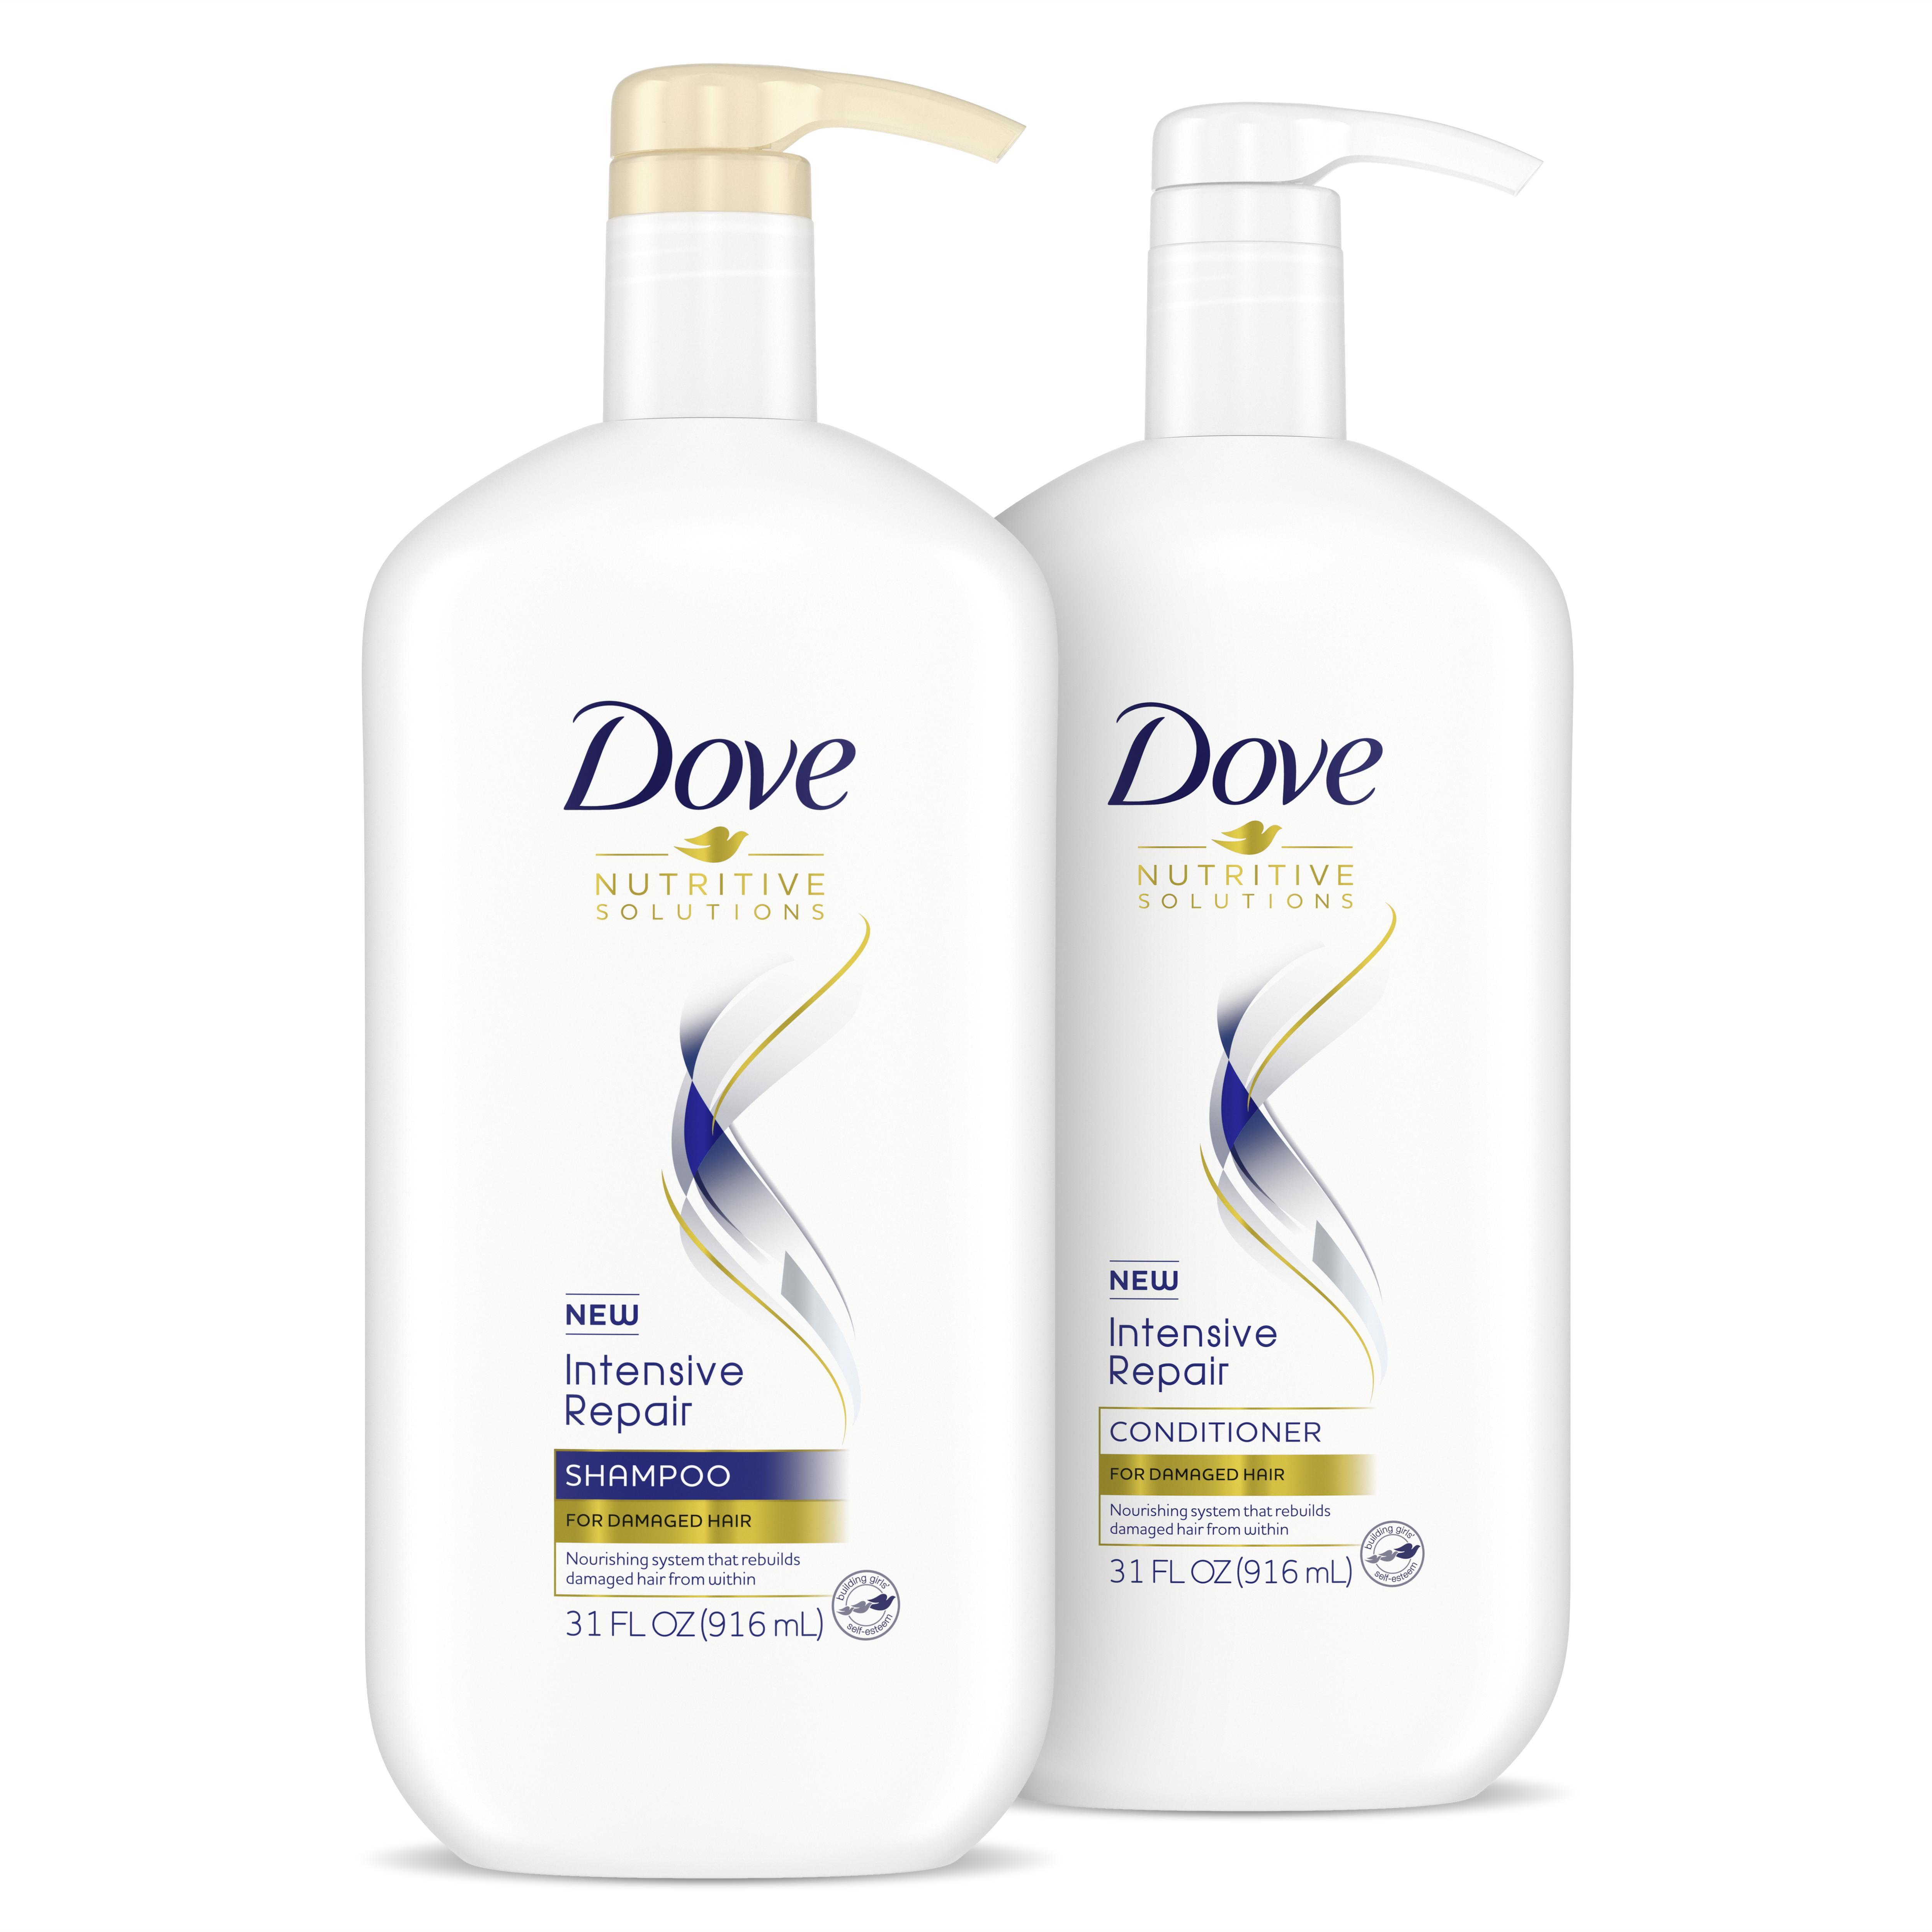 Dove Nutritive Solutions Shampoo and Conditioner with Intensive Repair 31 oz Count - Walmart.com